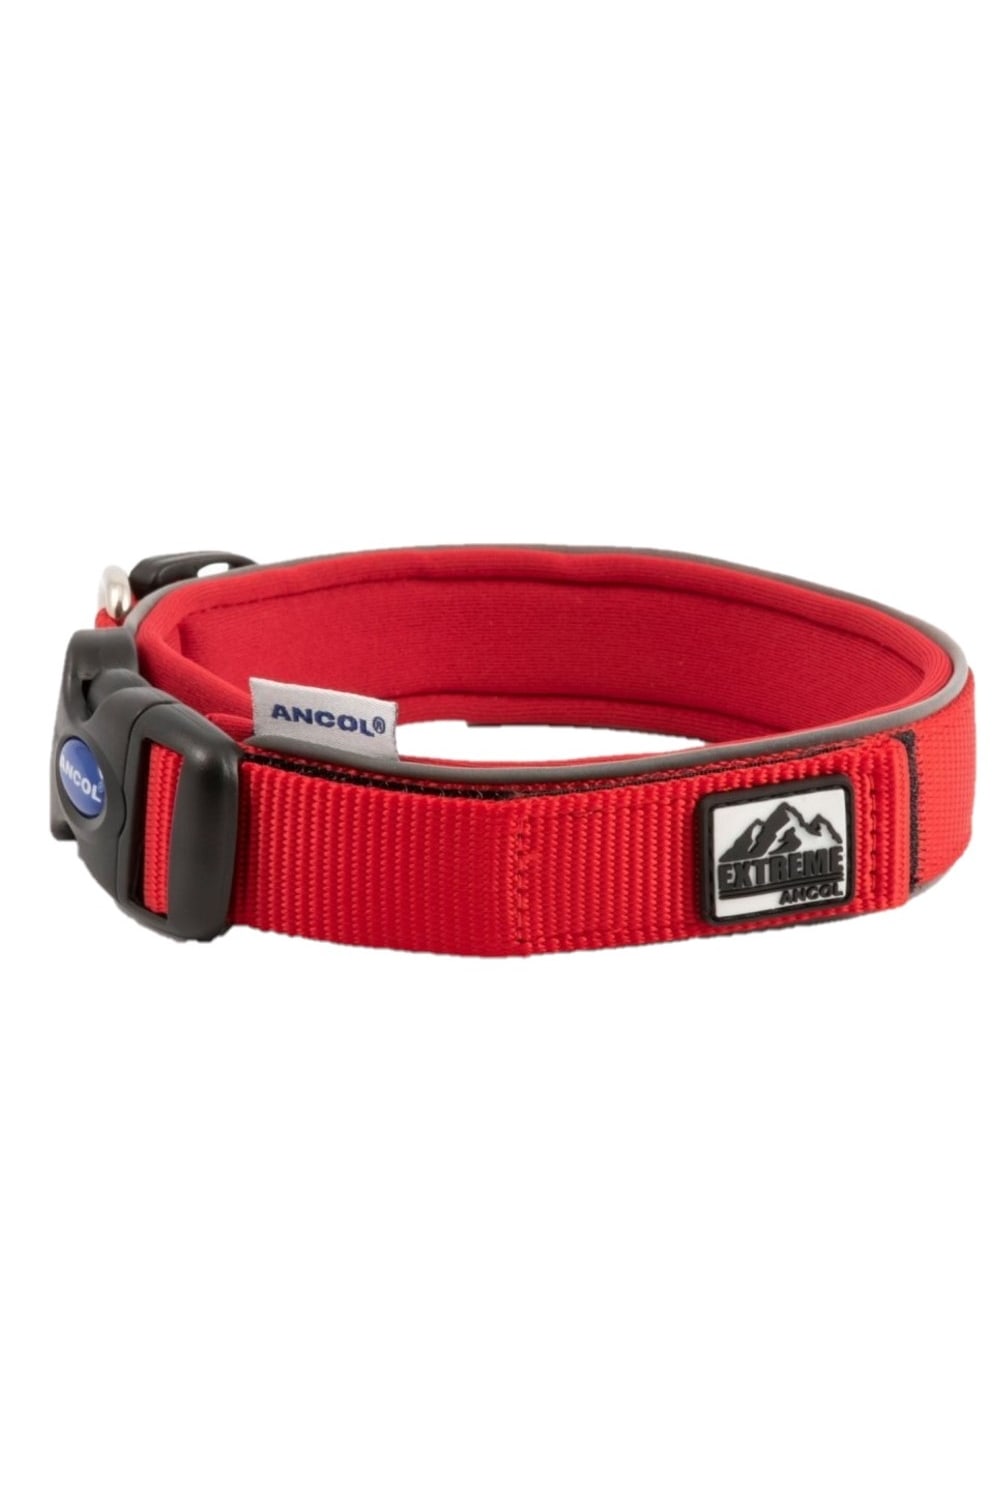 Ancol Extreme Shock Absorber Dog Collar (Red) (13.39in - 15.75in)